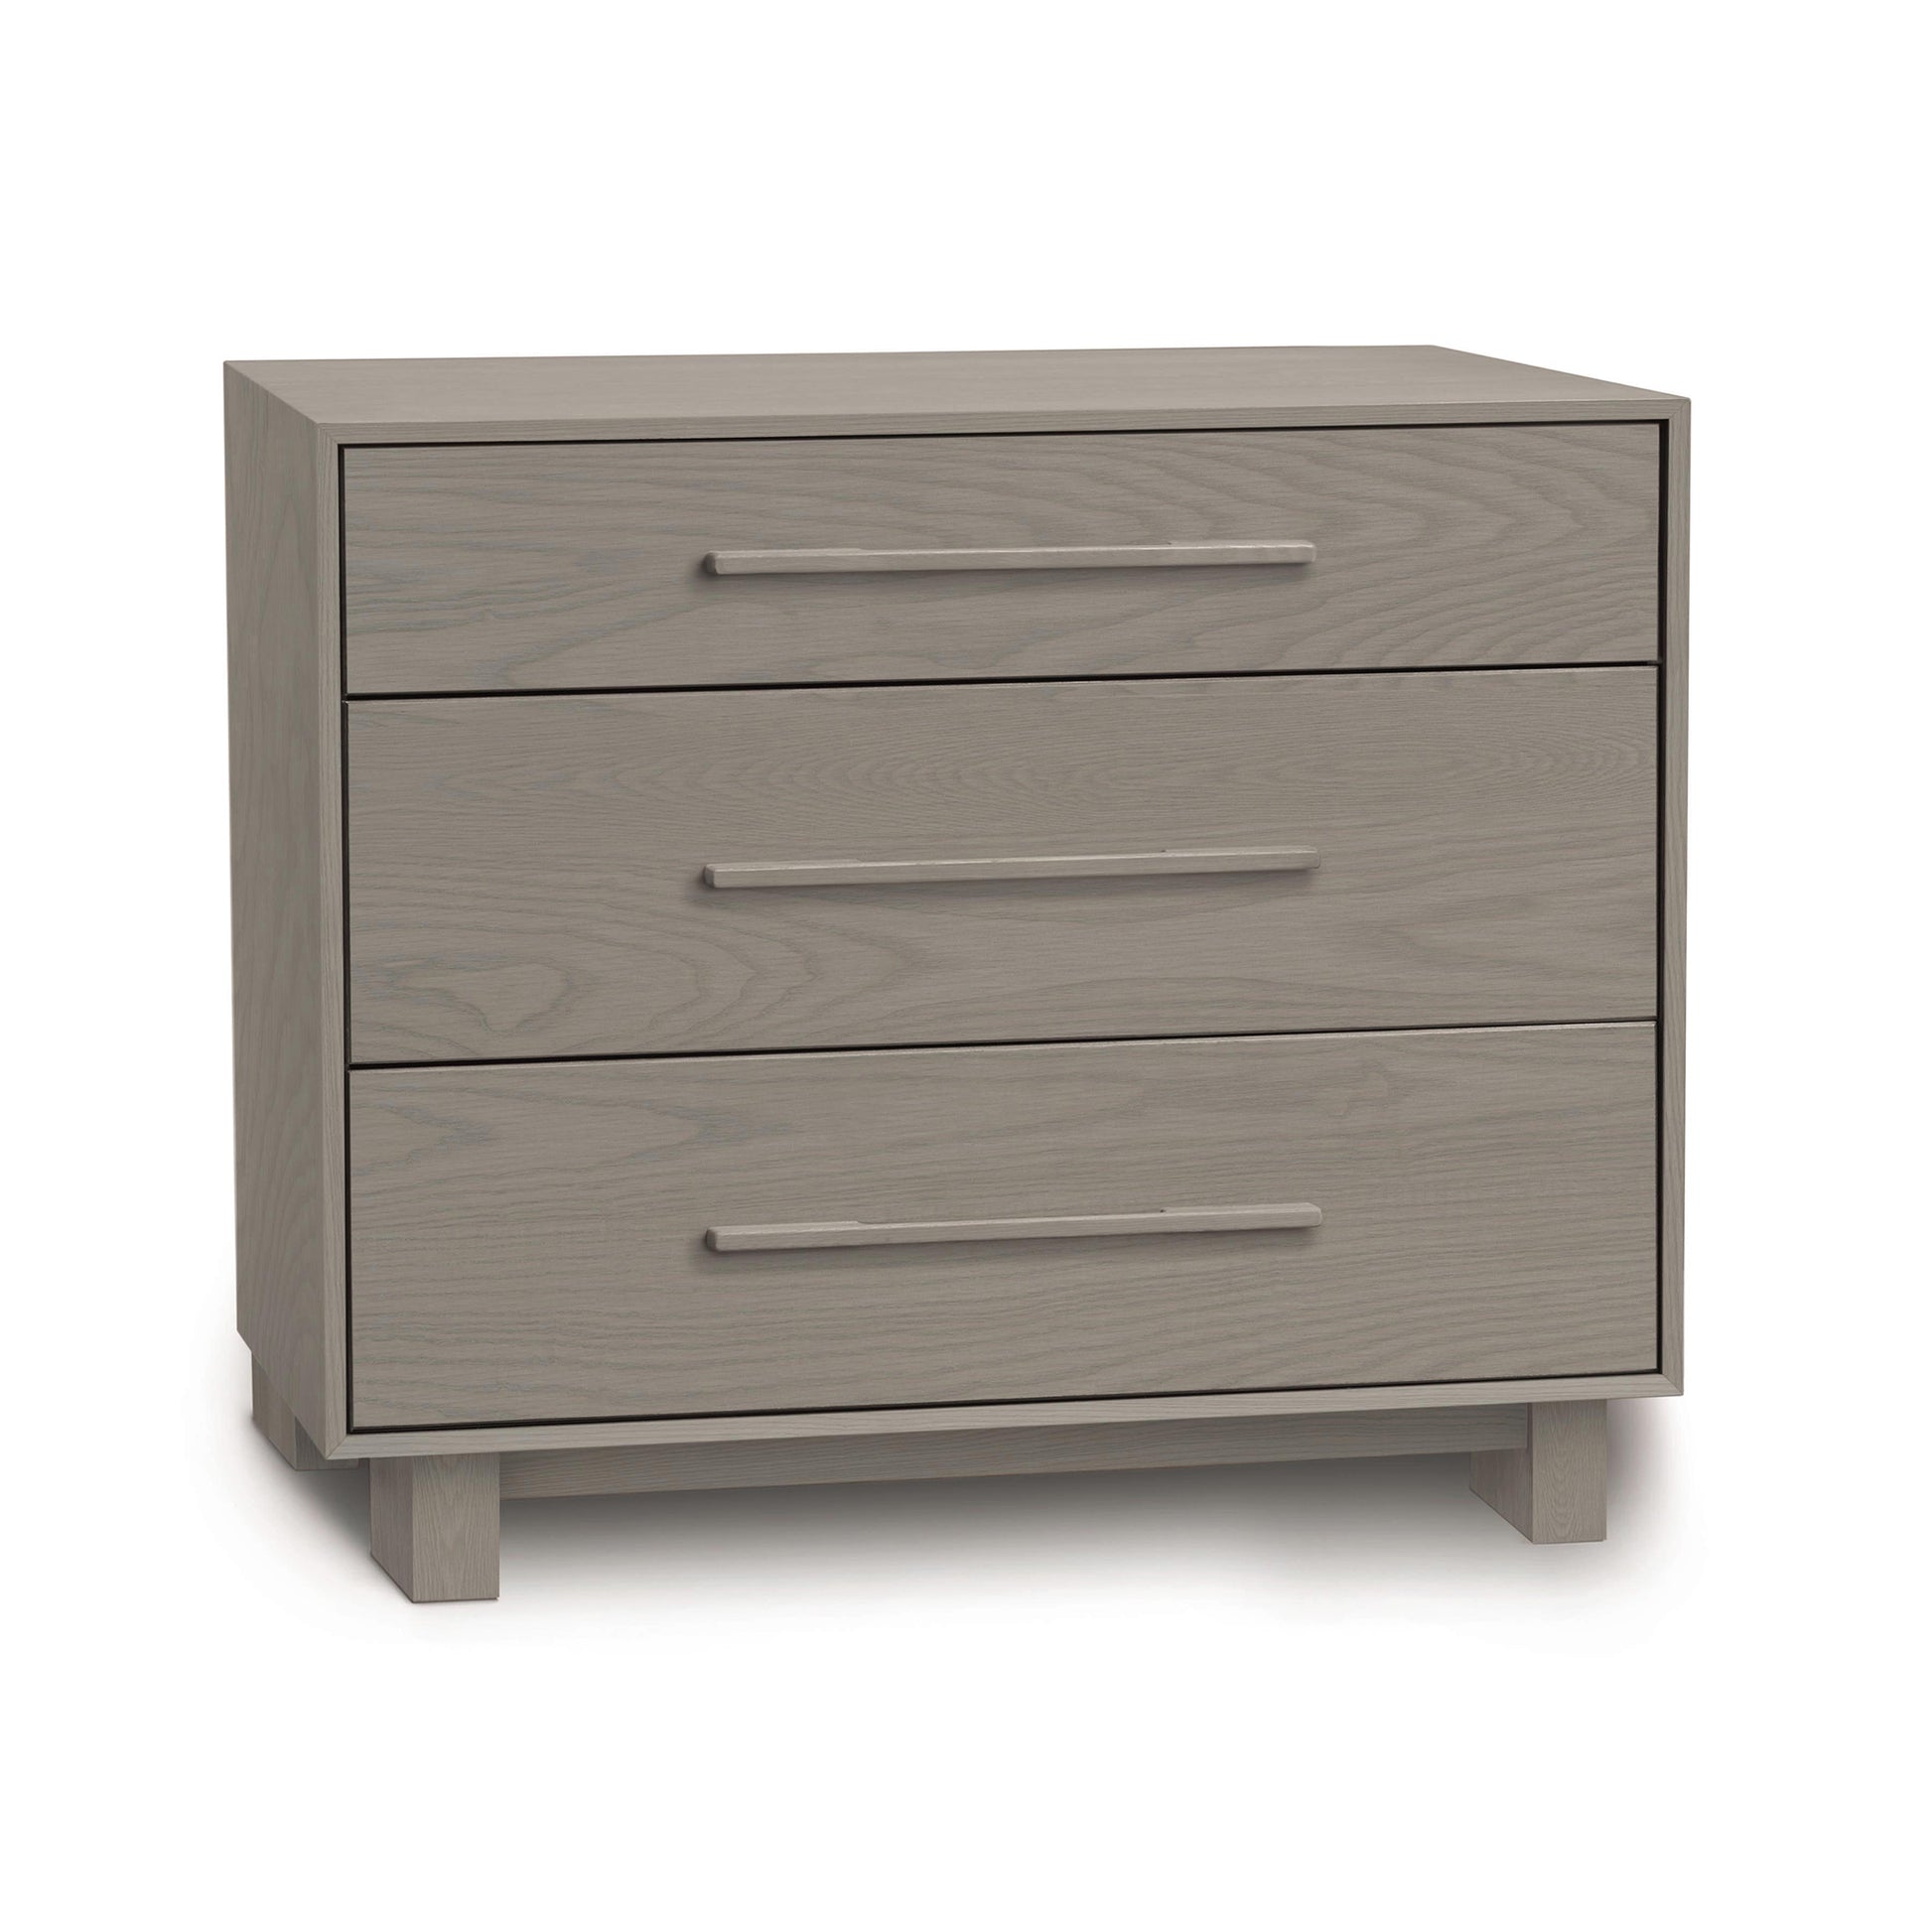 A contemporary design Copeland Furniture Sloane 3-Drawer Chest in modern gray on a plain white background.